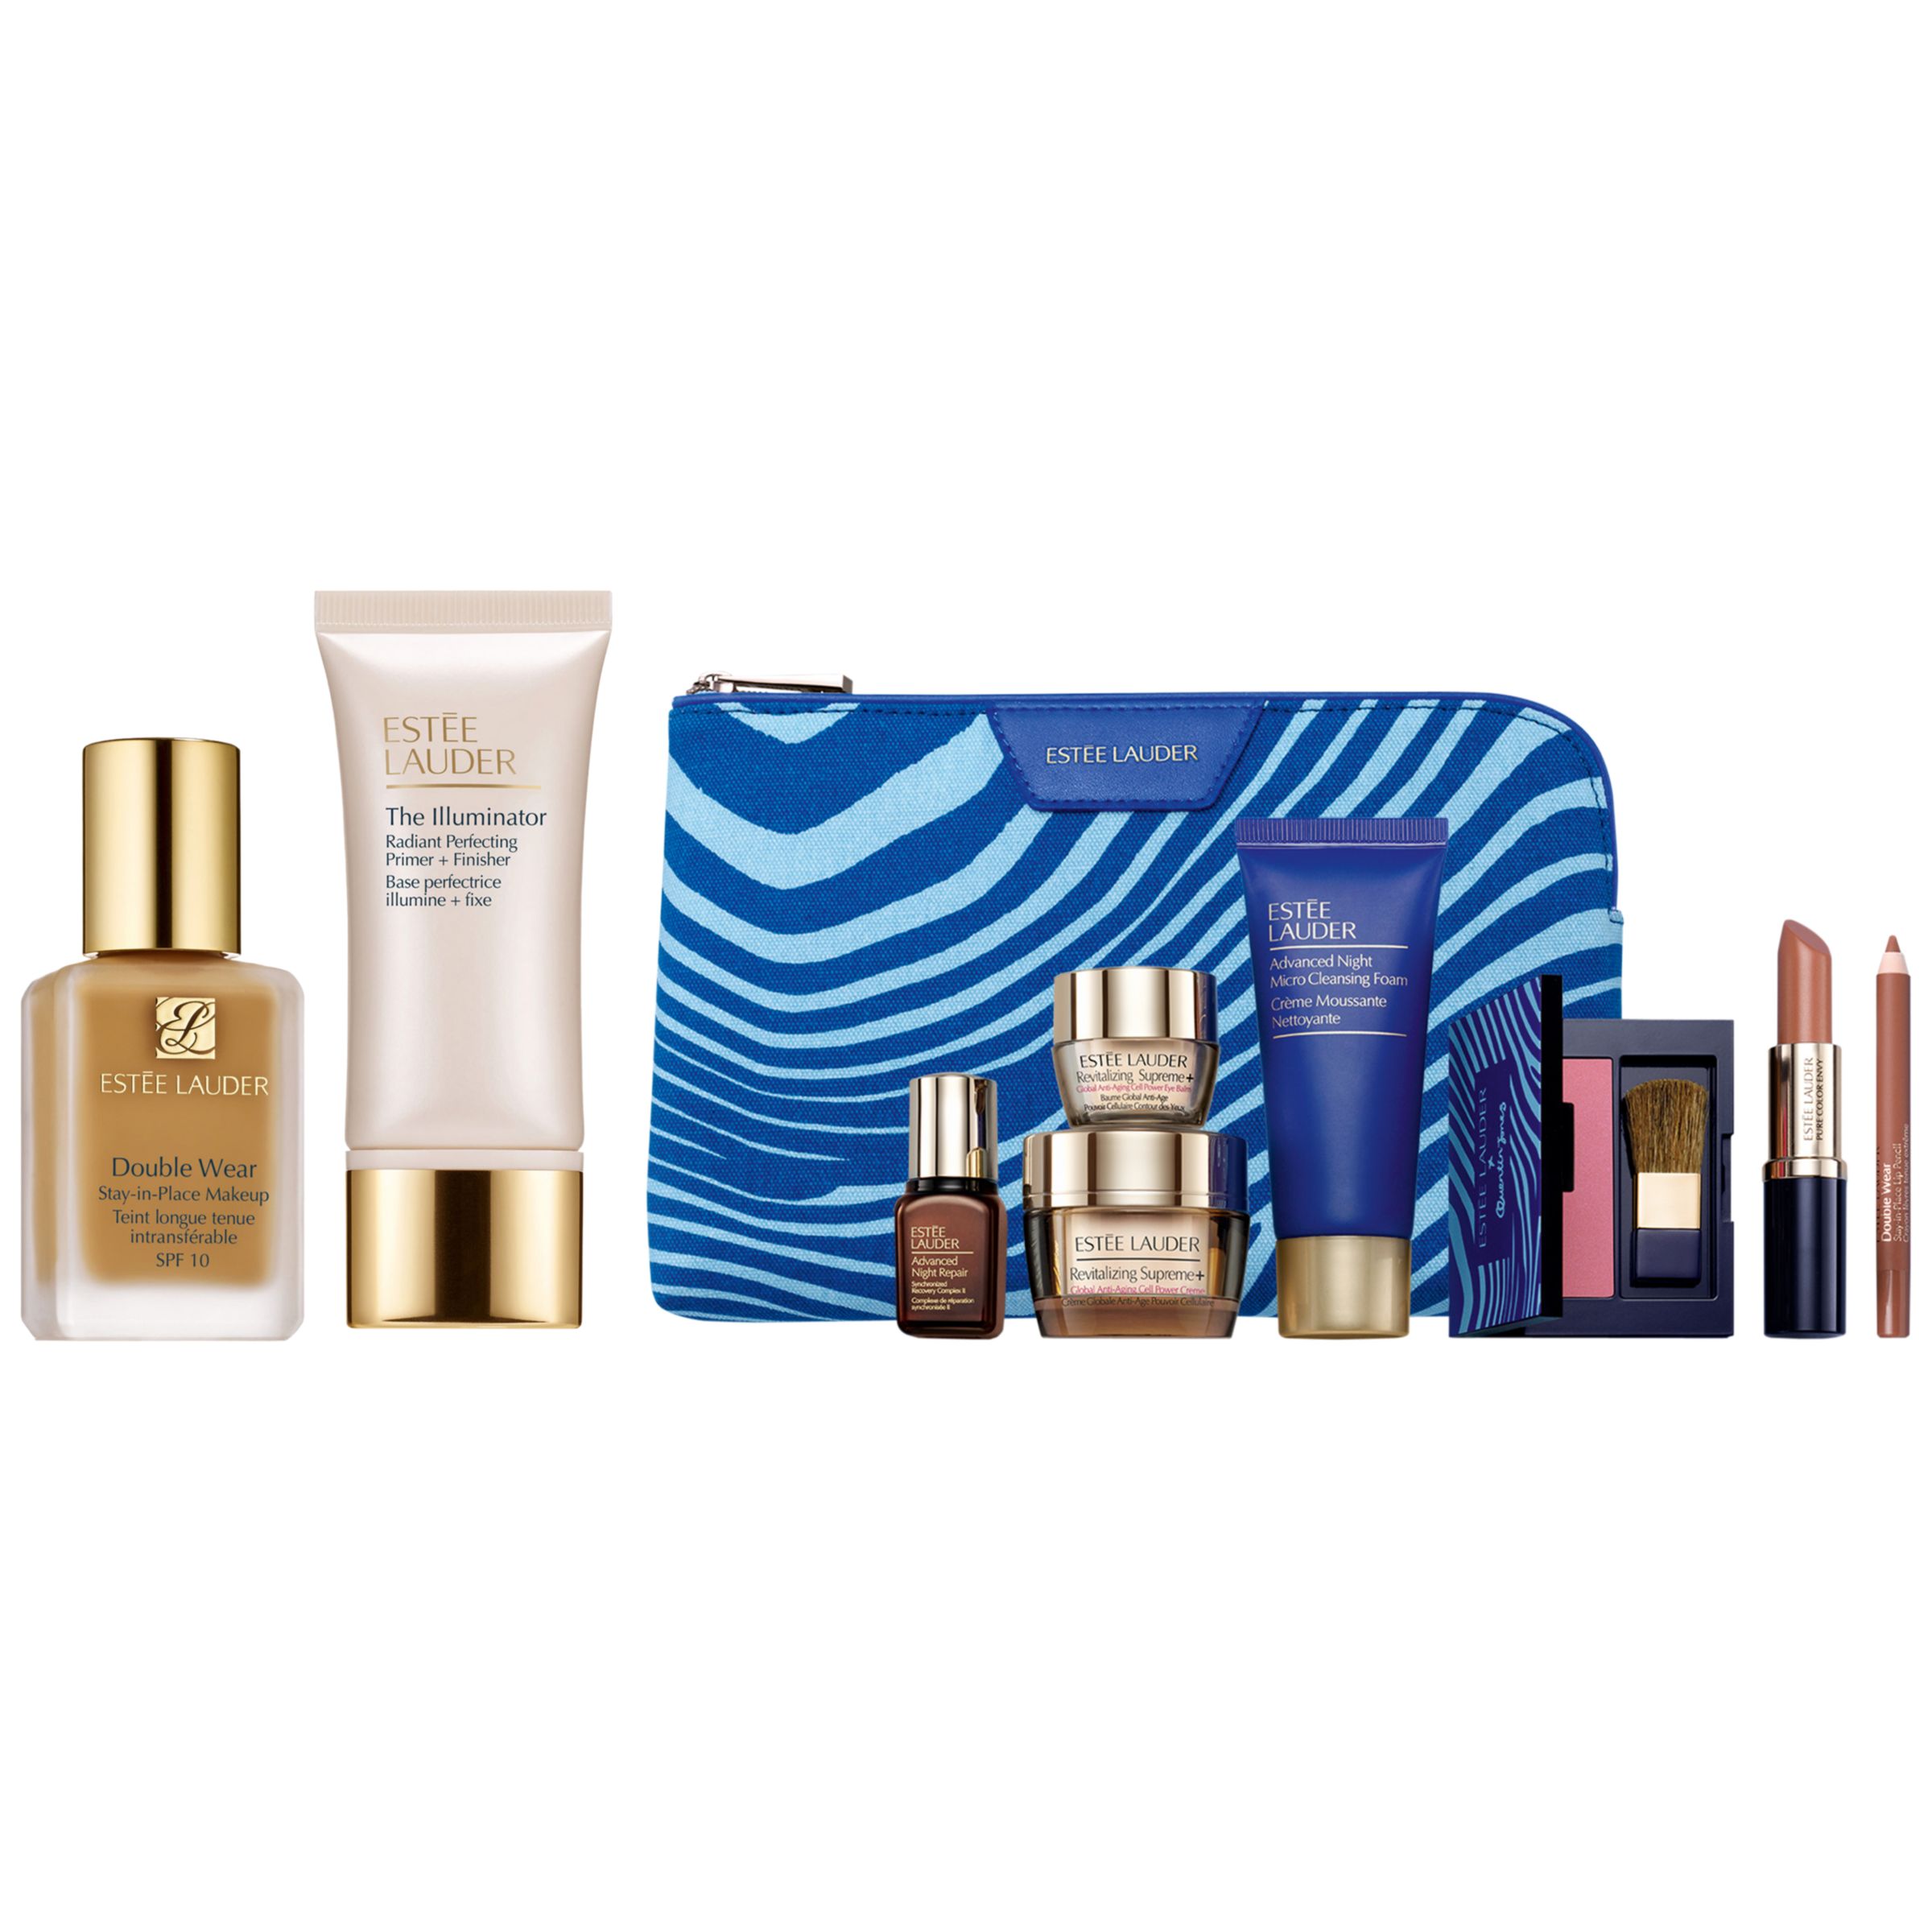 Estée Lauder Double Wear Stay-In-Place Foundation 4N1 Shell Beige and Primer with Gift, Bundle